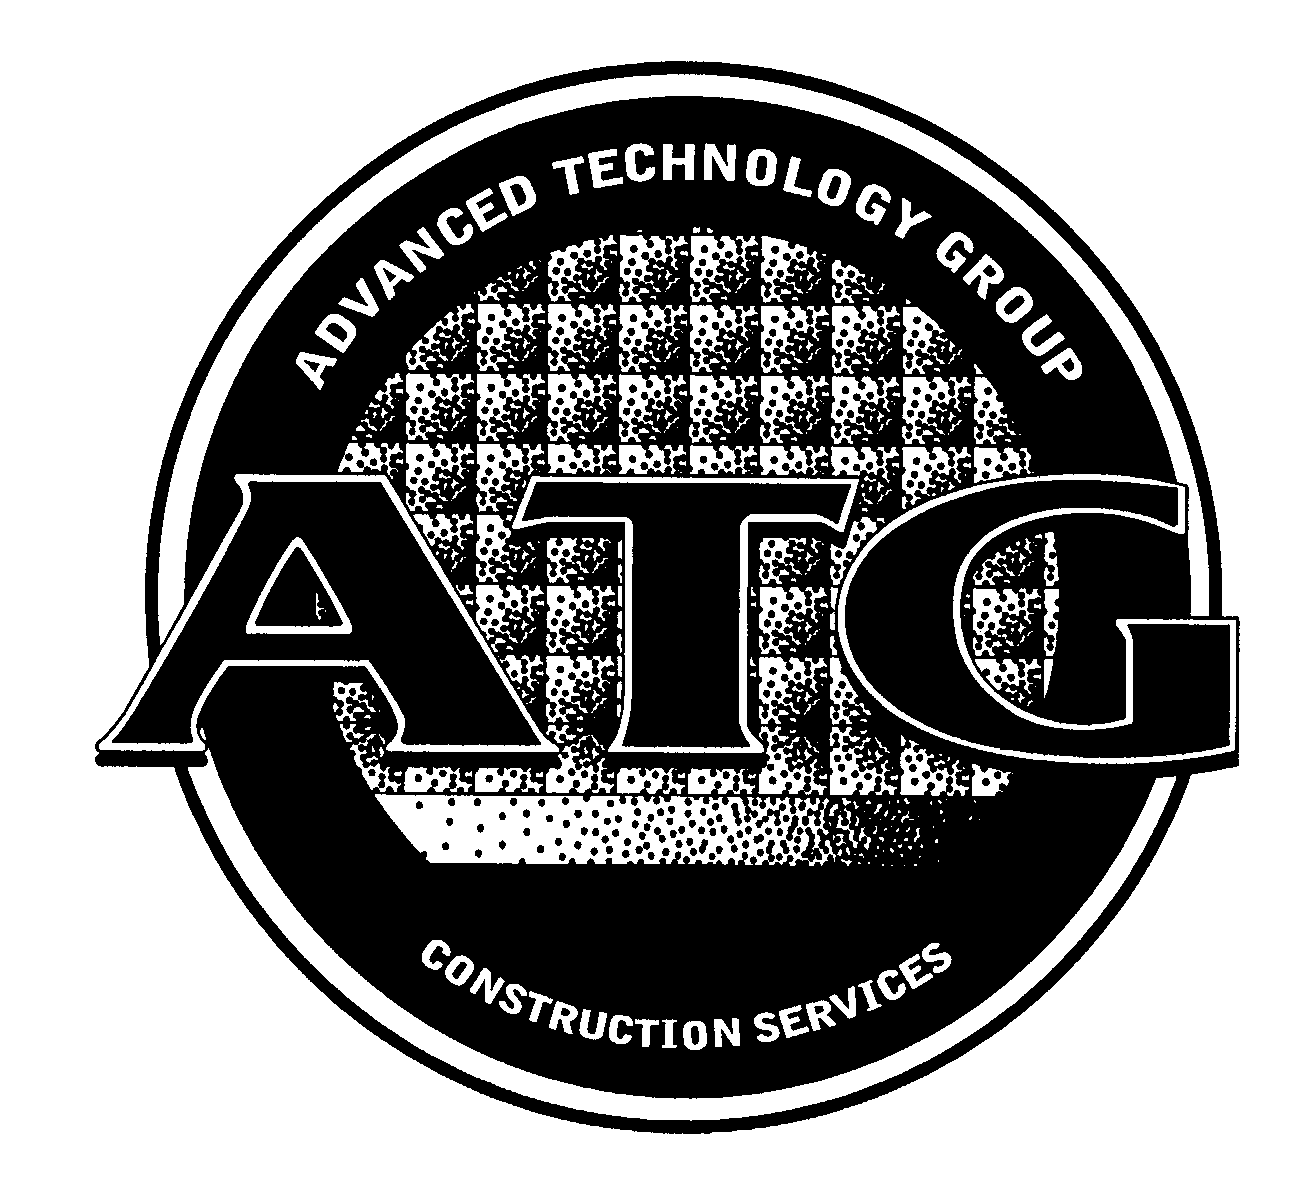  ADVANCED TECHNOLOGY GROUP ATG CONSTRUCTION SERVICES